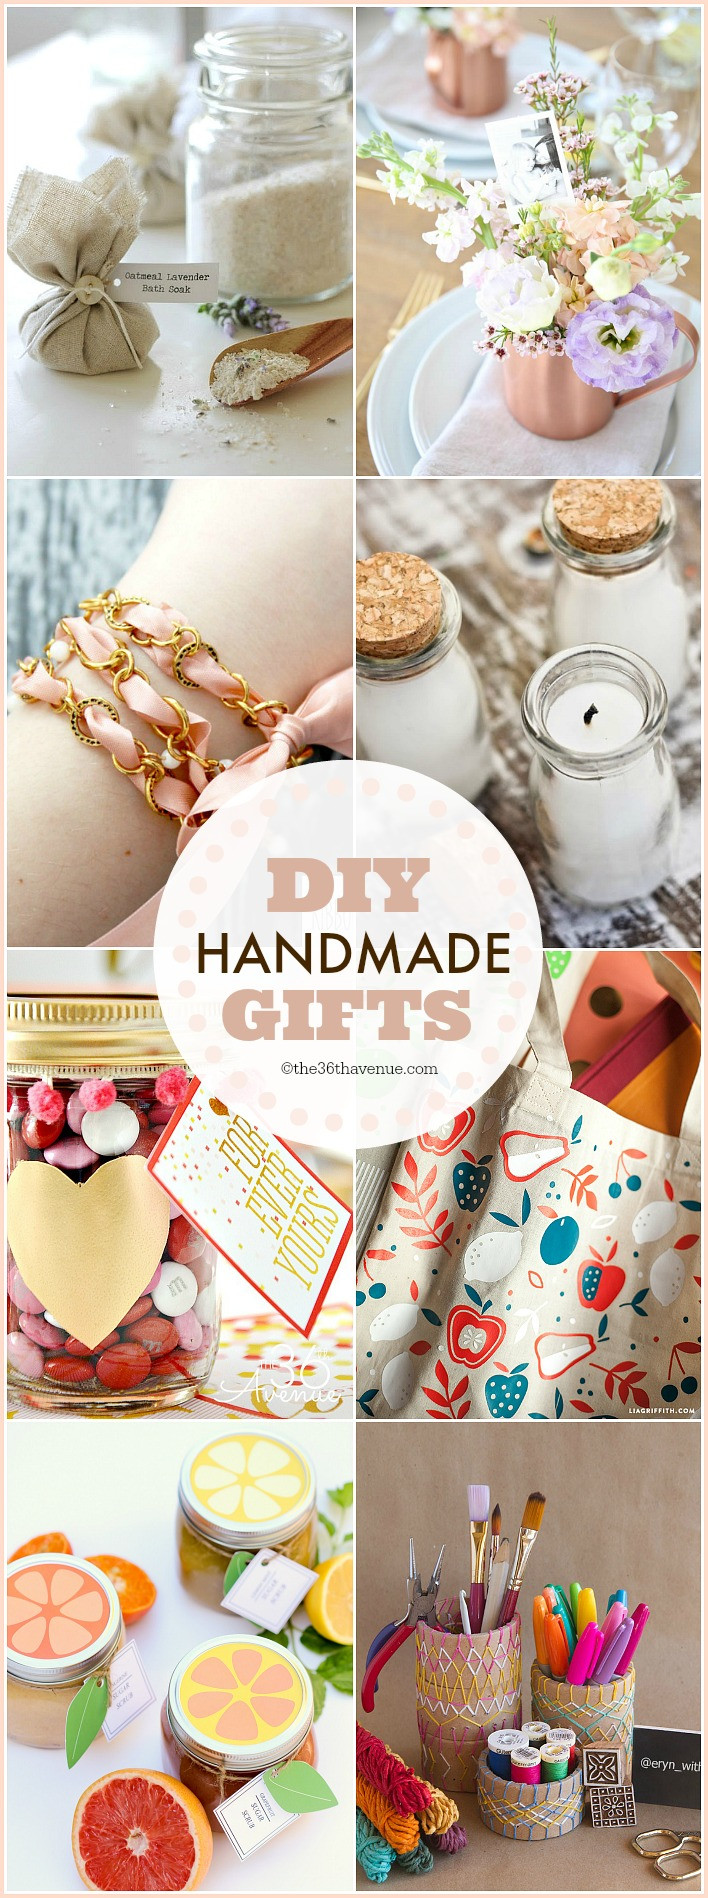 DIY Birthday Gifts Ideas
 100 Handmade Gifts Under Five Dollars The 36th AVENUE